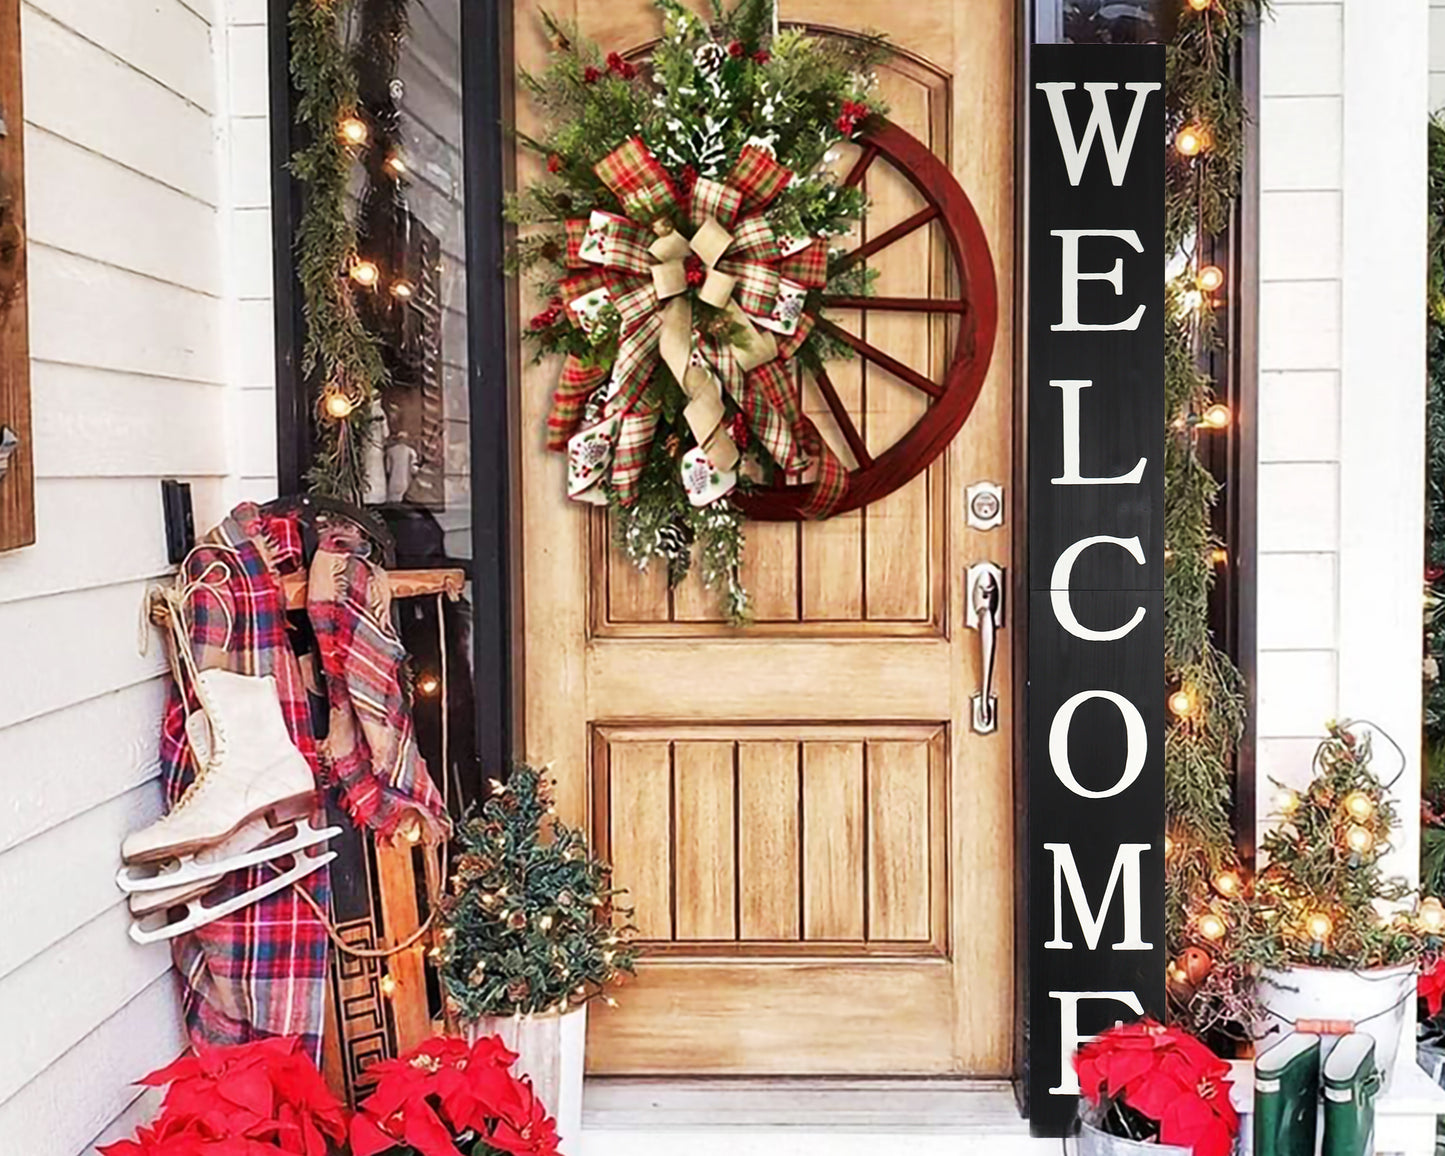 72in Welcome Porch Sign - Rustic Farmhouse Front Porch Decor in Black - Welcome Sign for Front Door